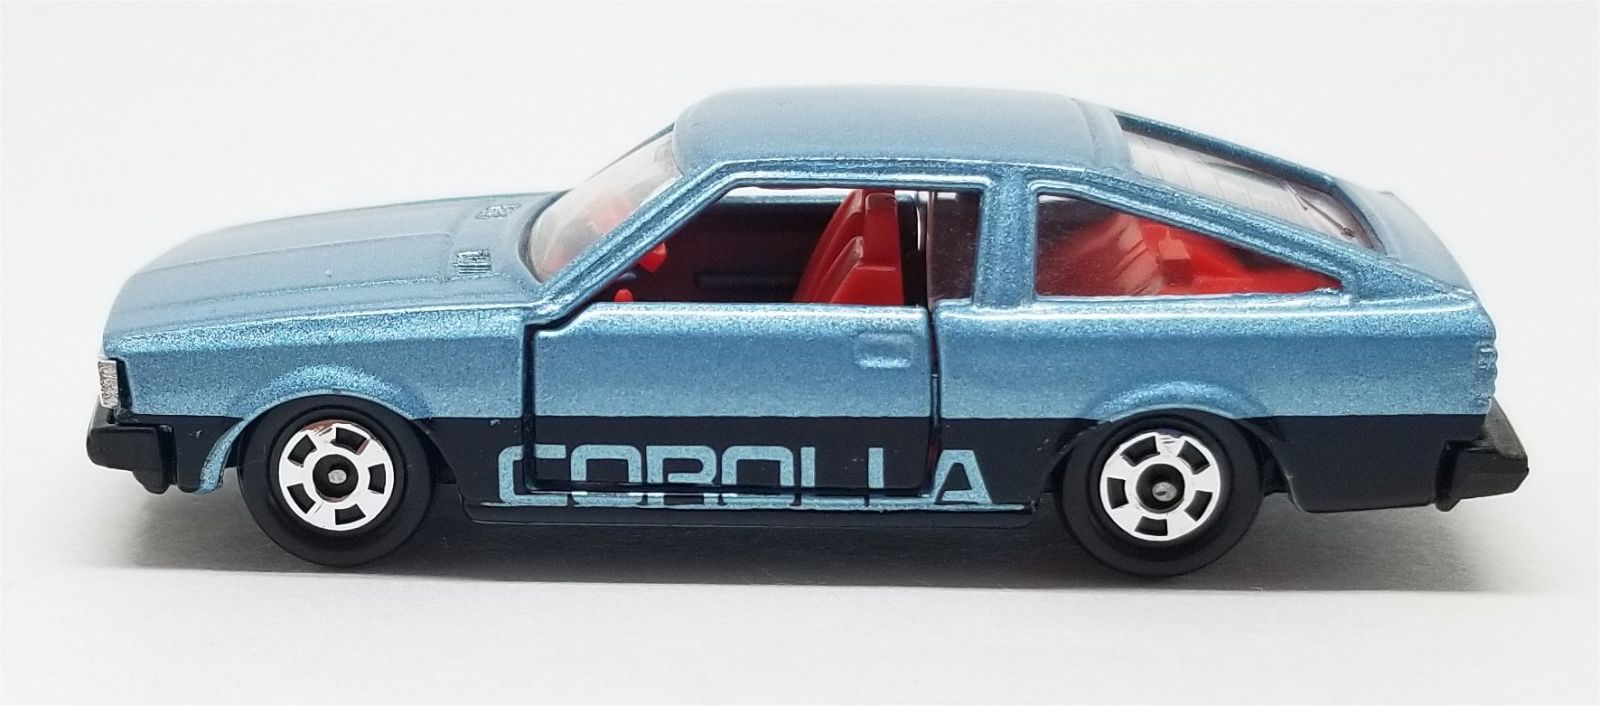 Illustration for article titled [REVIEW] Tomica Toyota Corolla Levin